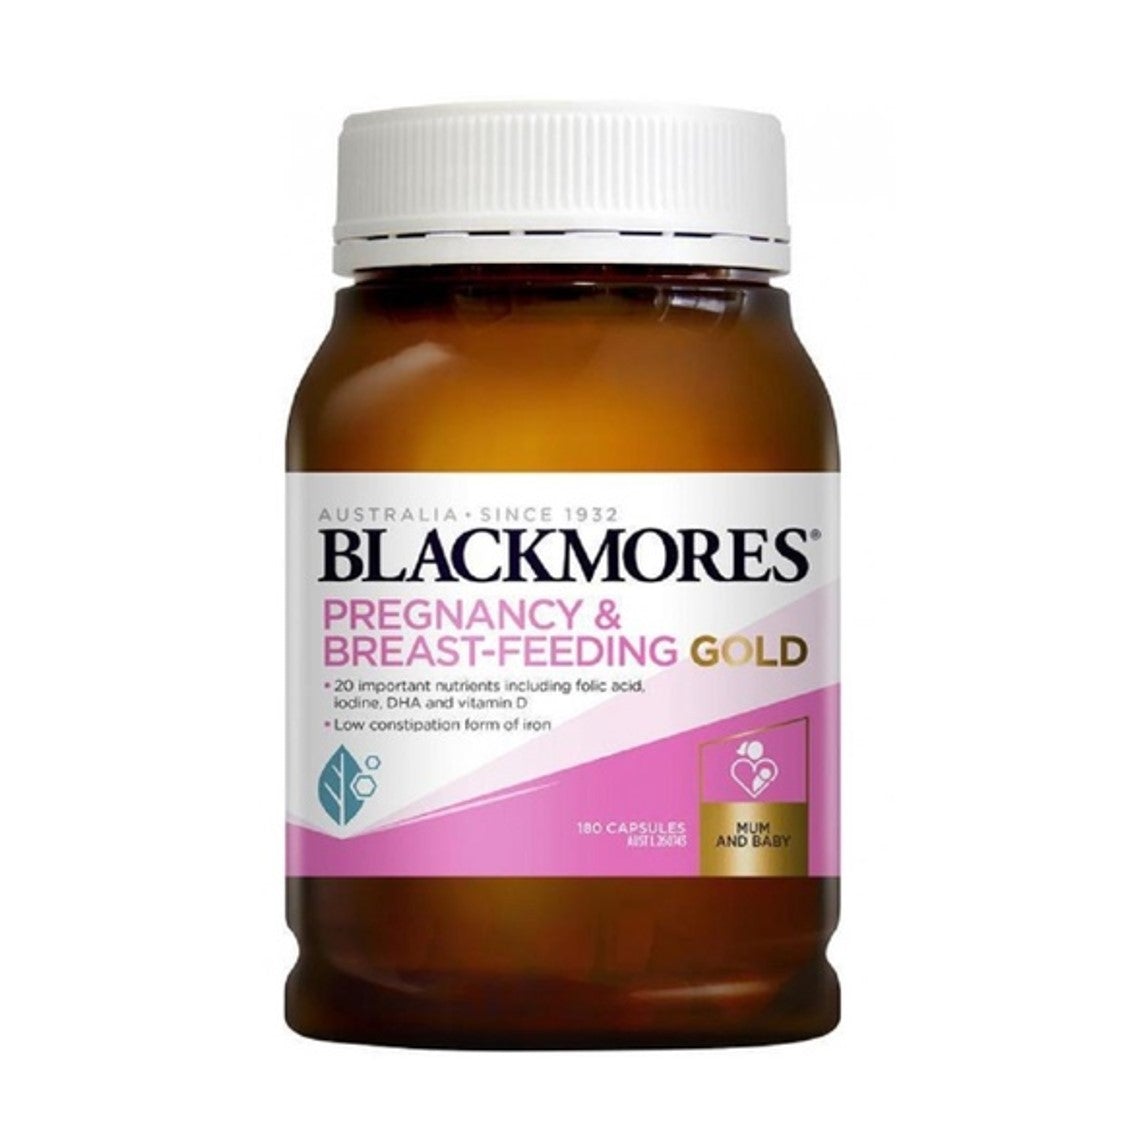 blackmores-pregnancy-and-breast-feeding-gold